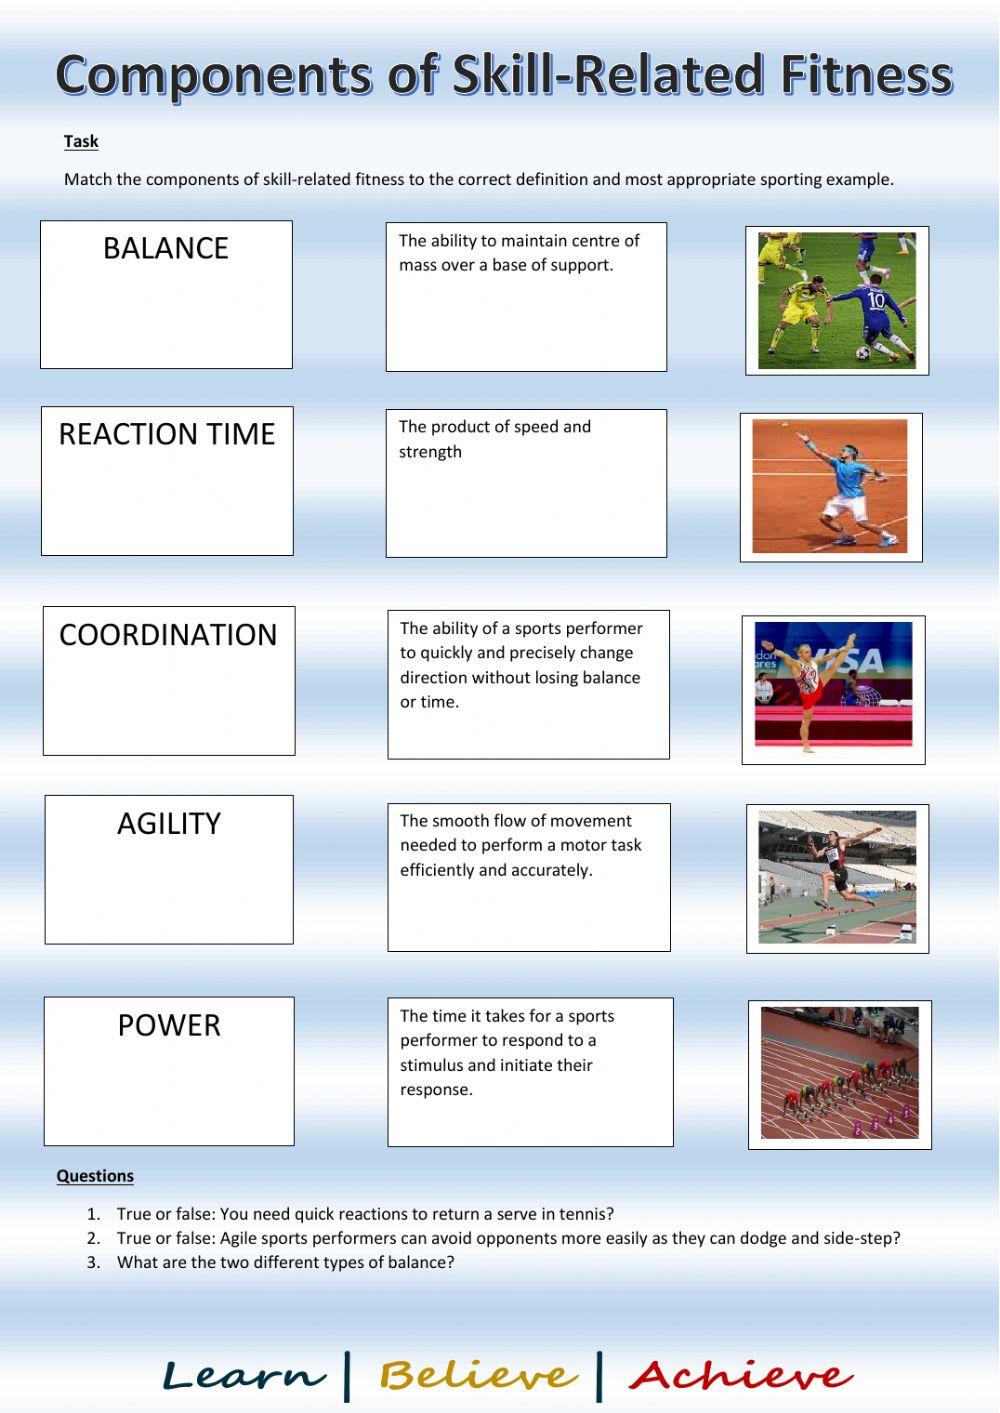 Components of skill-related fitness